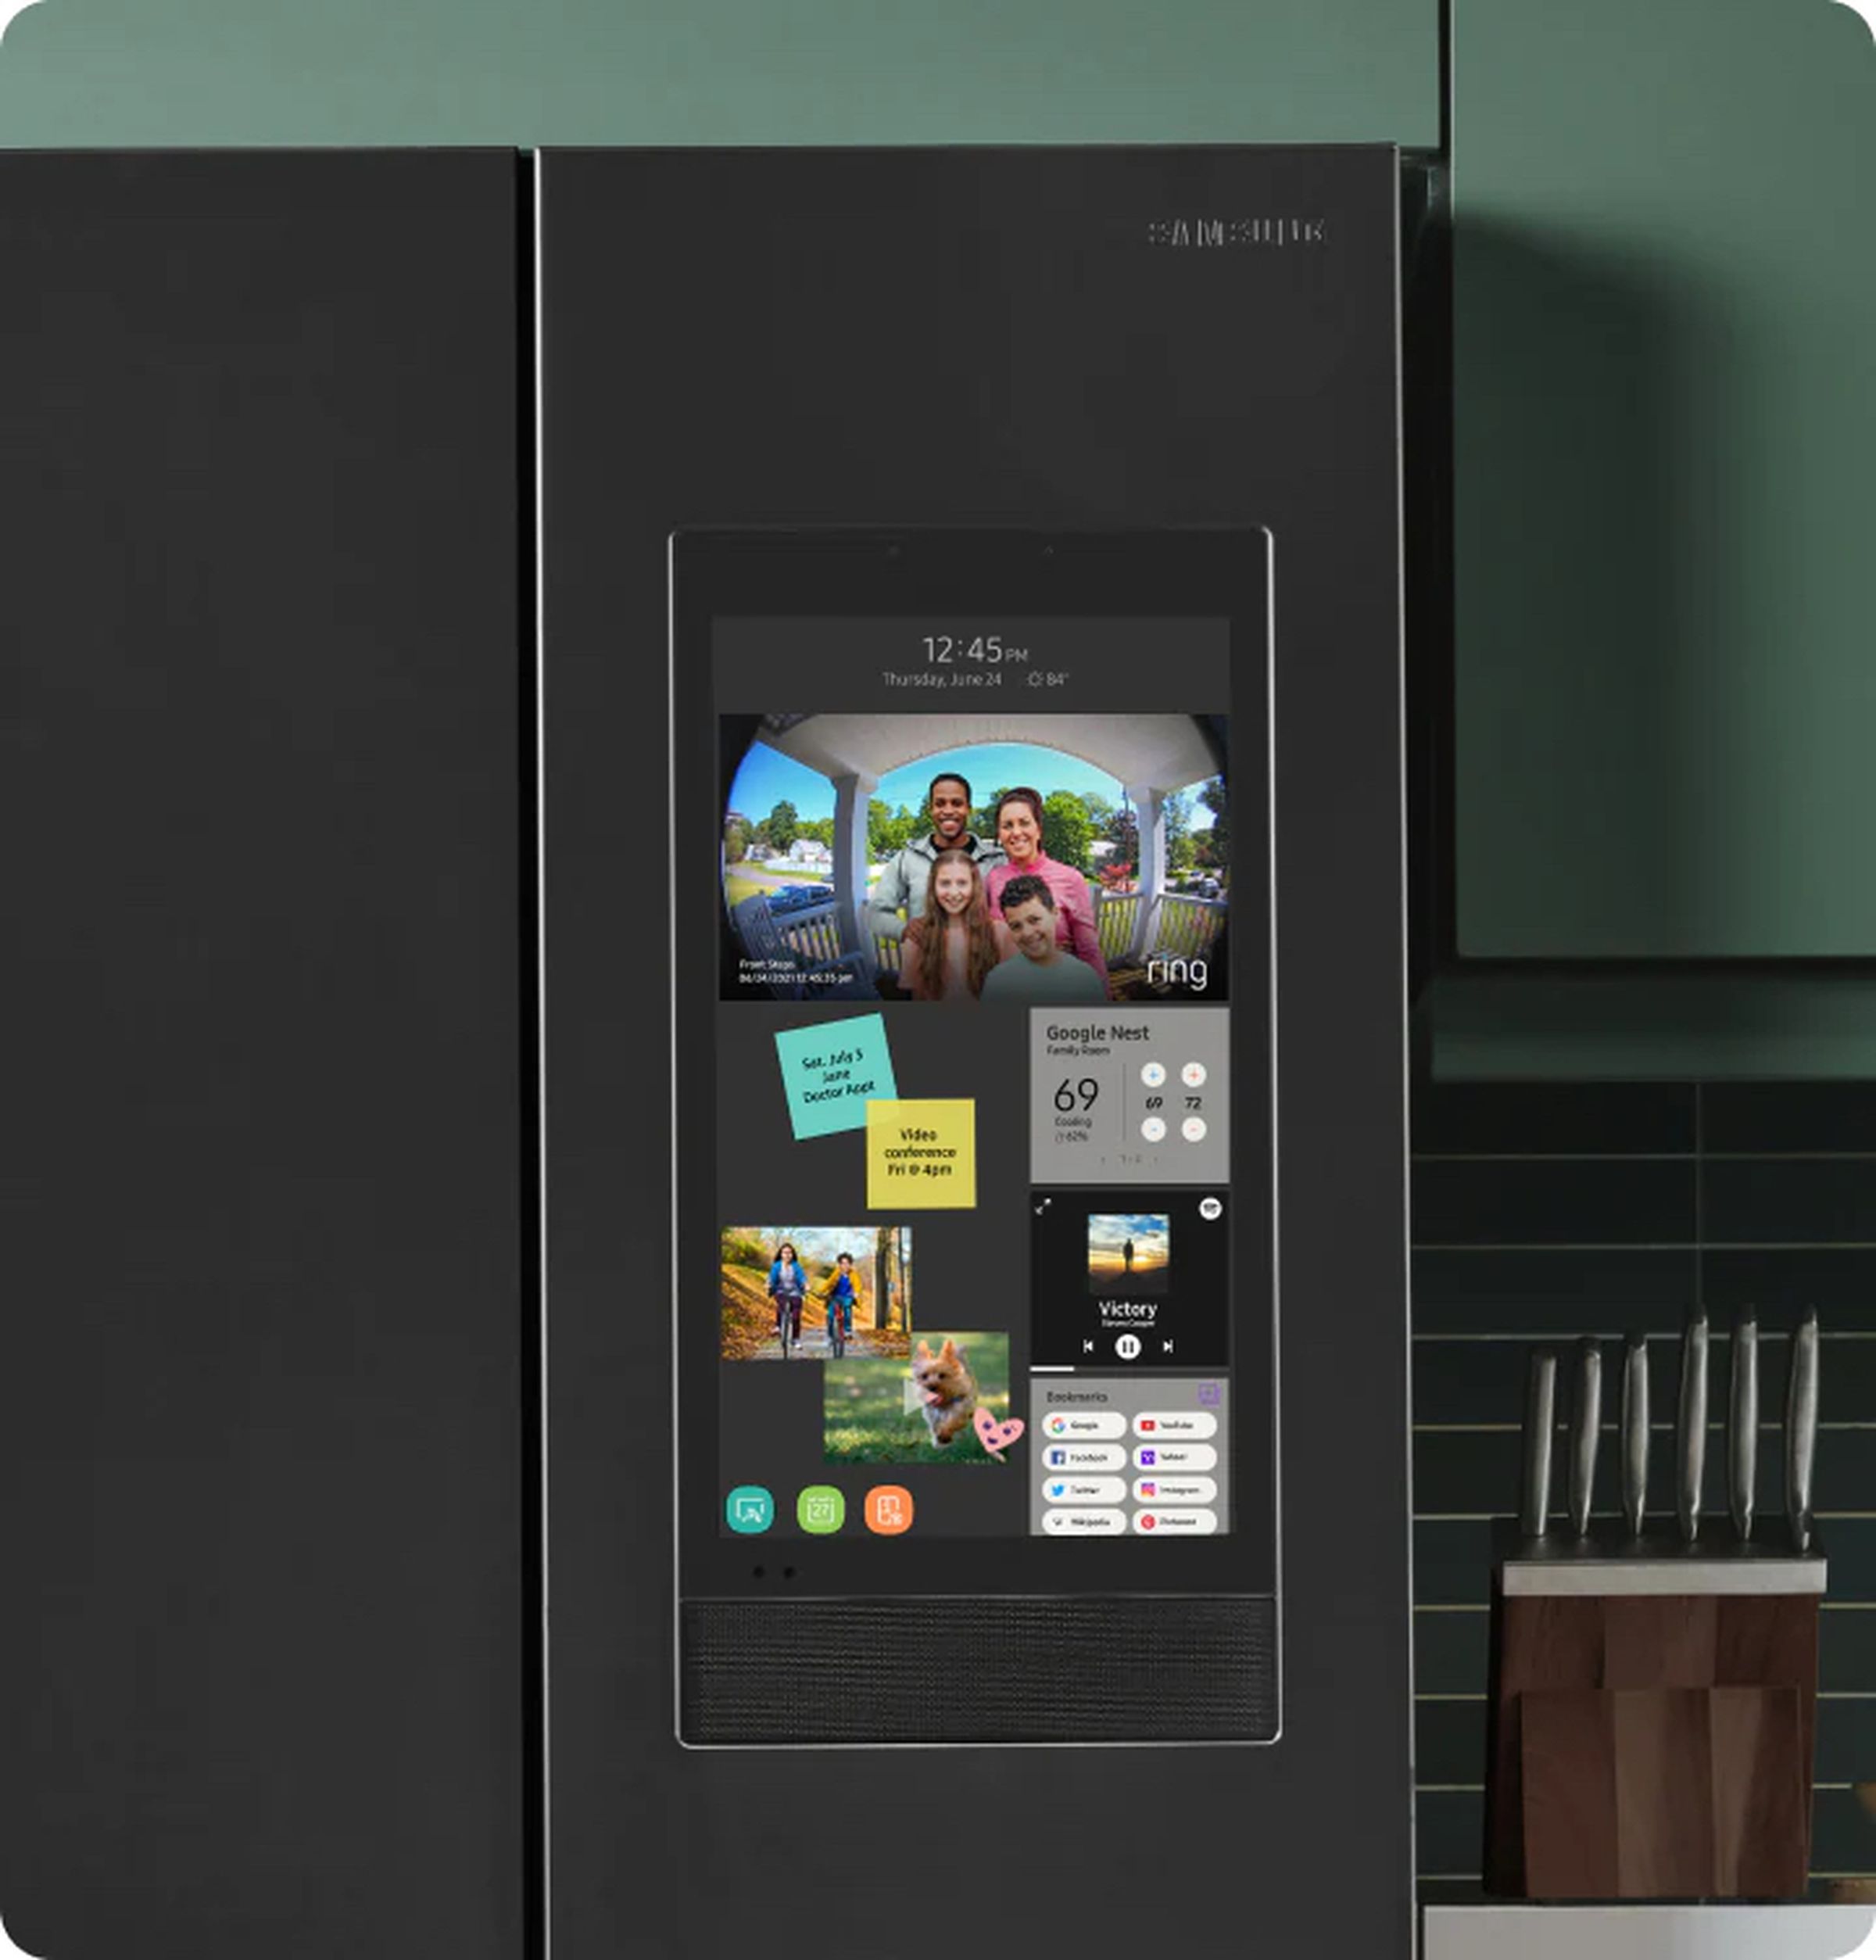 The Samsung Family Hub refrigerator will be updated to support Matter.